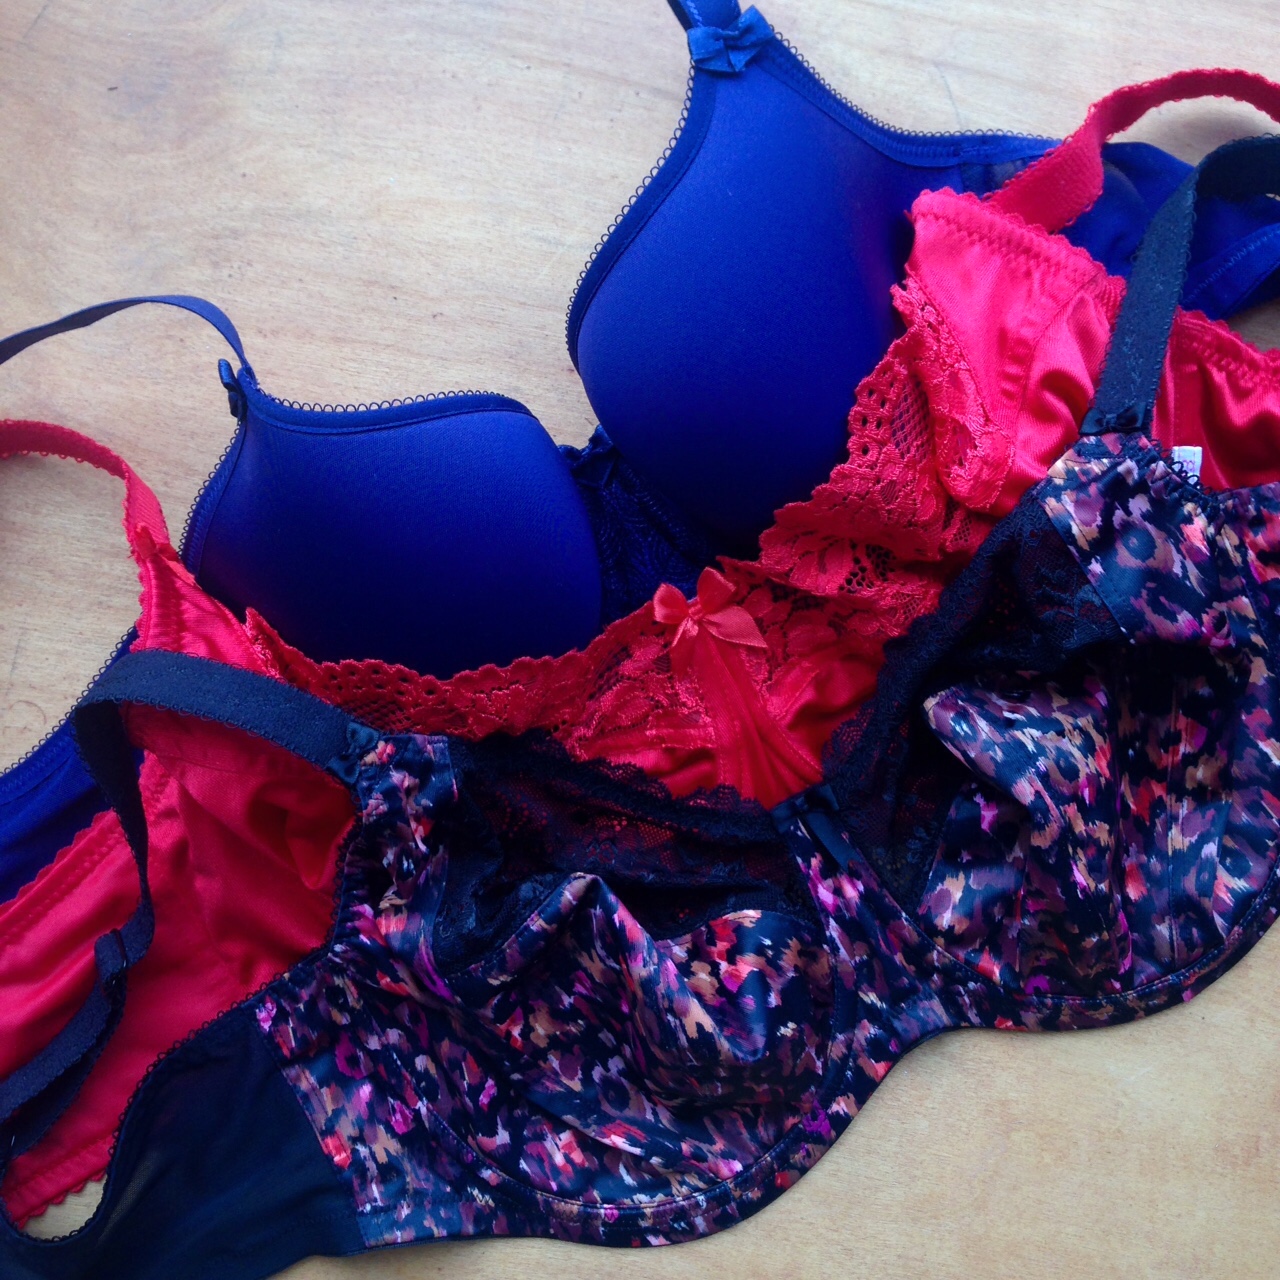 How To Machine-Wash Bras: Don't! - Broad Lingerie